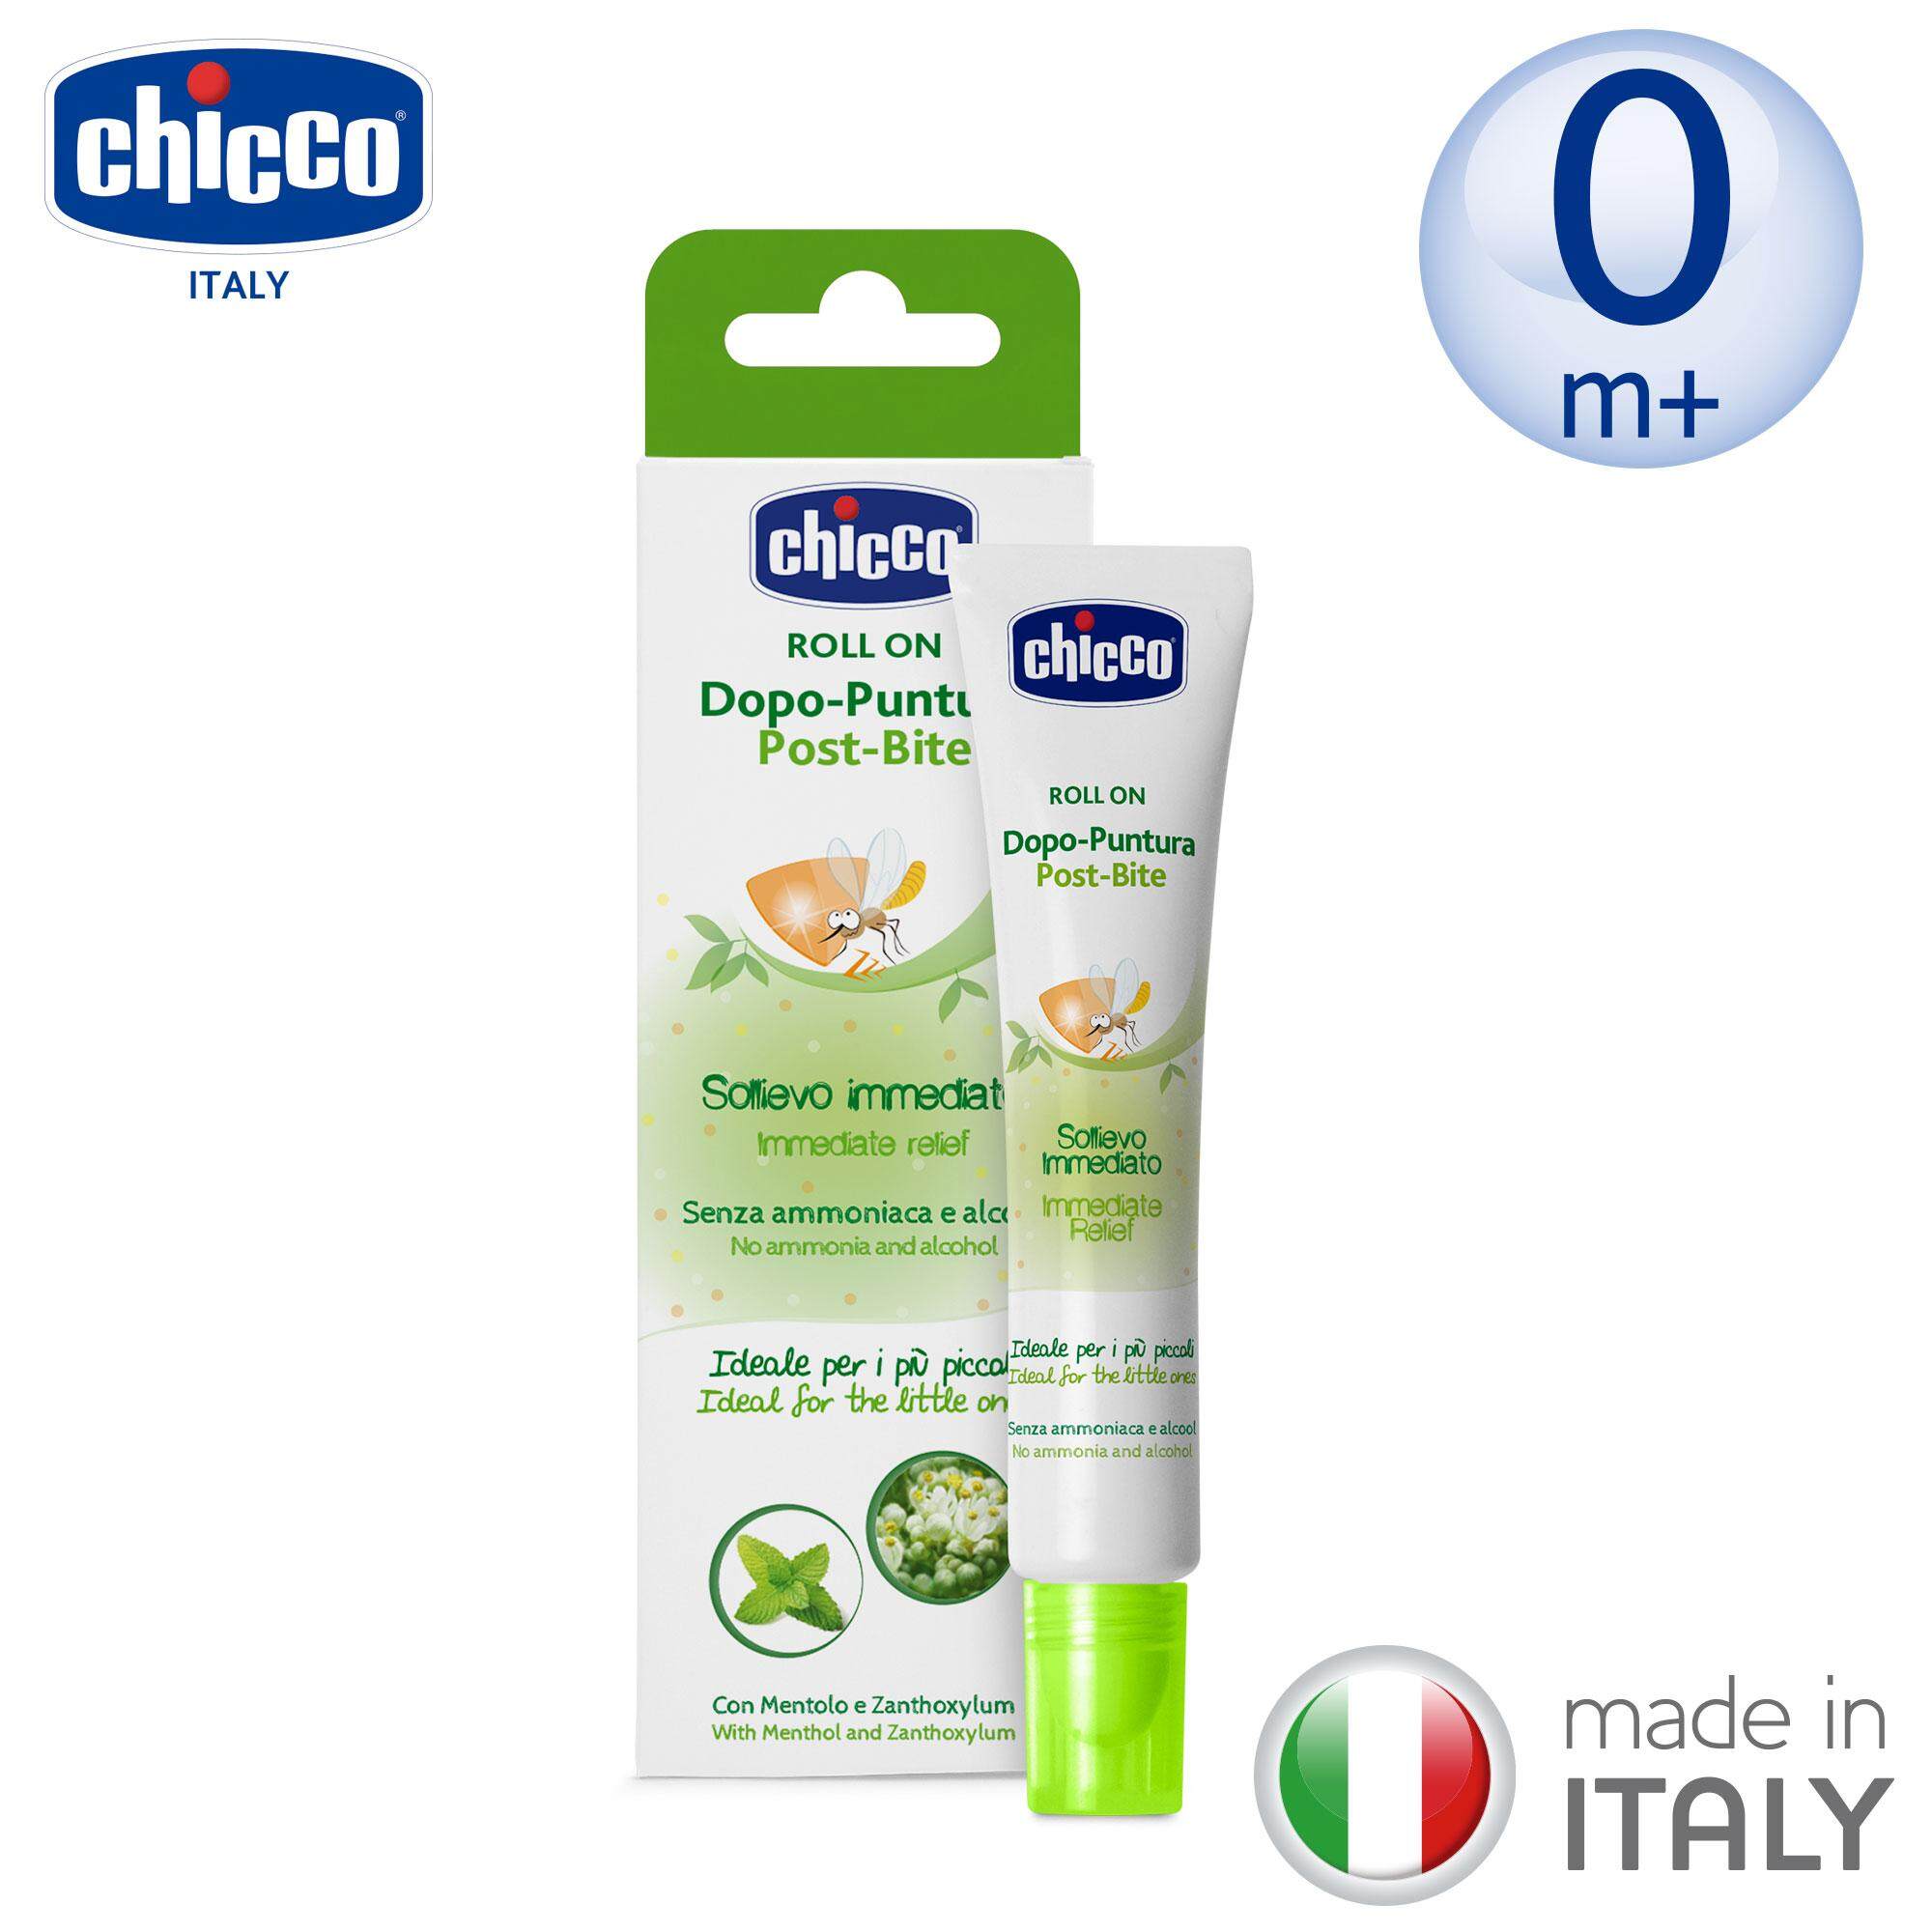 Chicco Anti-Mosquito Natural After-Bite Roll-On-10ml